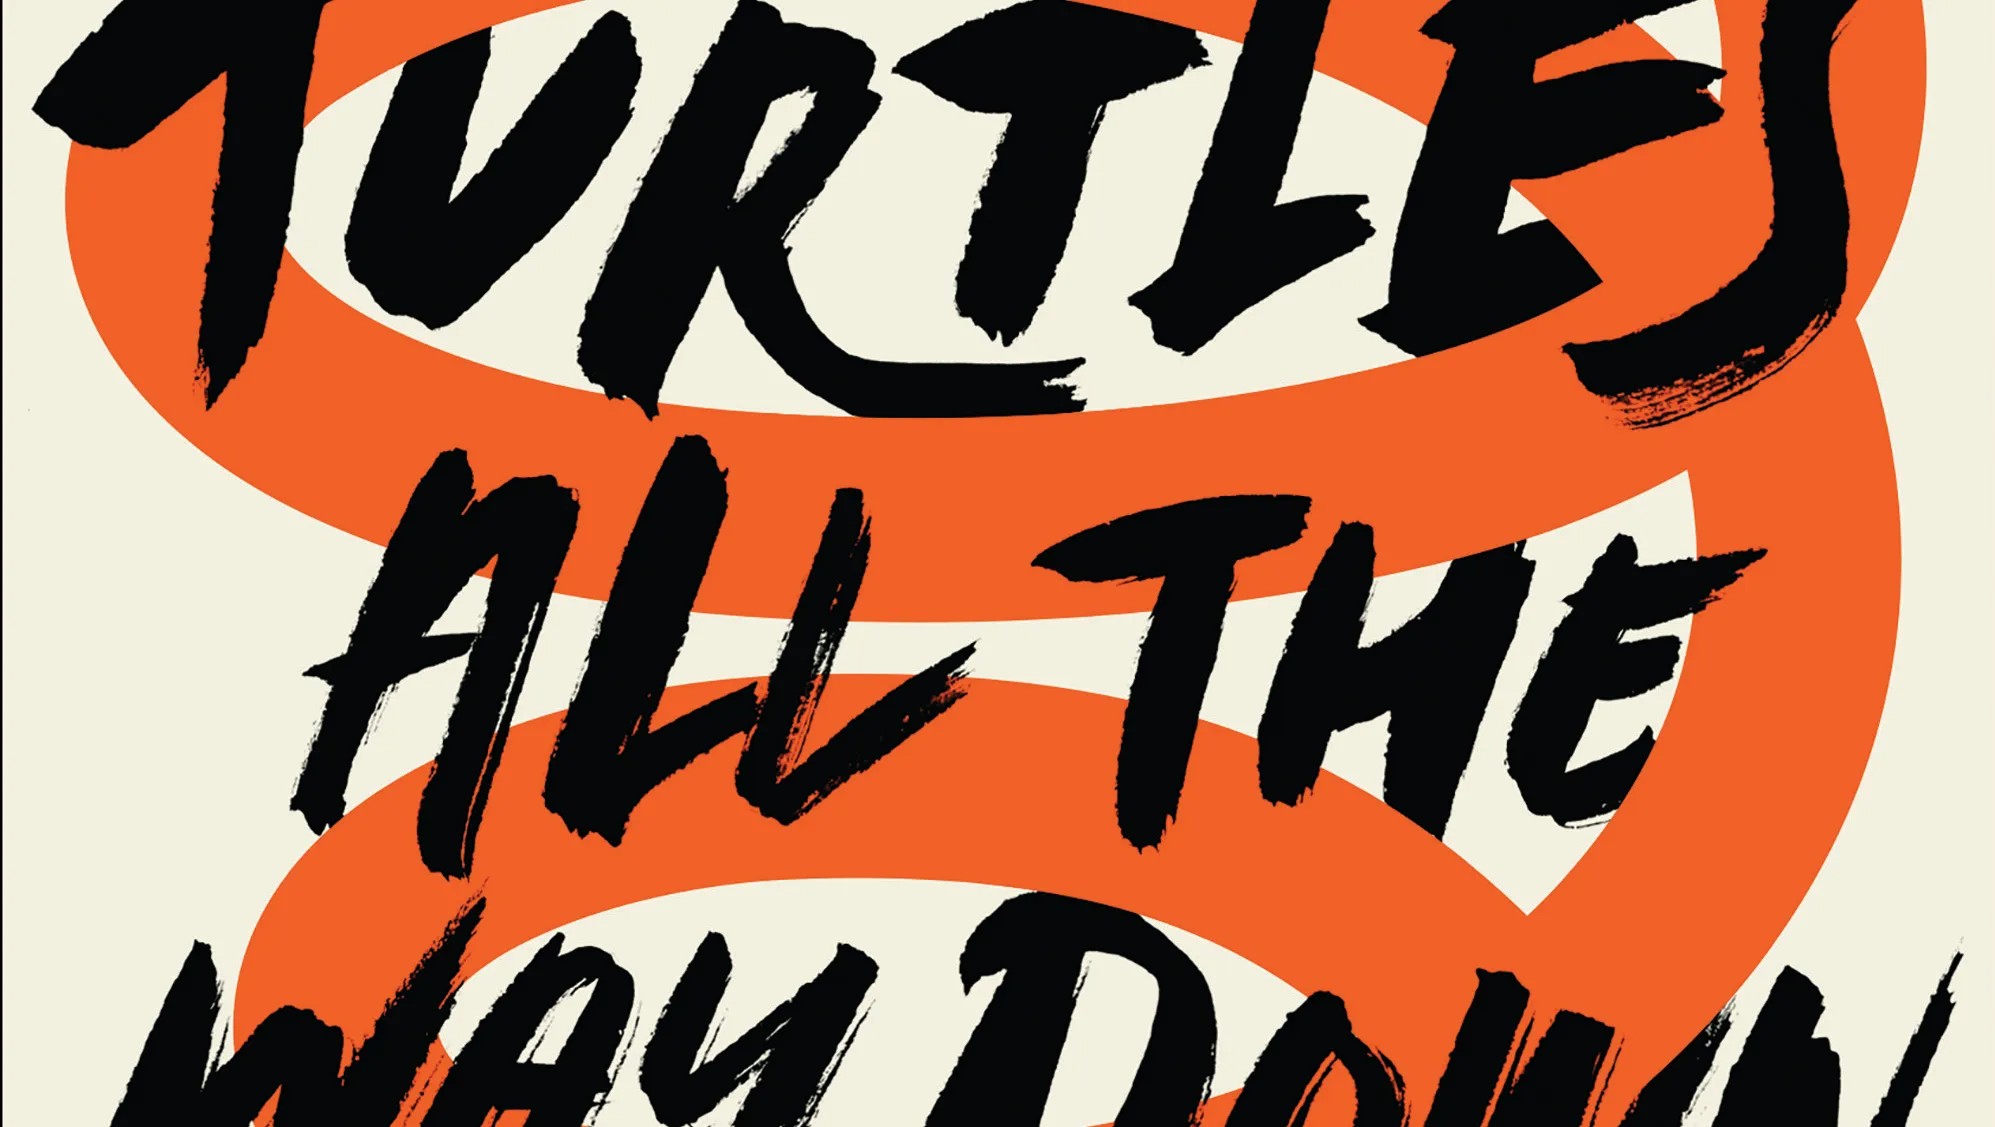 Turtles All the Way Down' Movie Details: Cast, Date, and More!